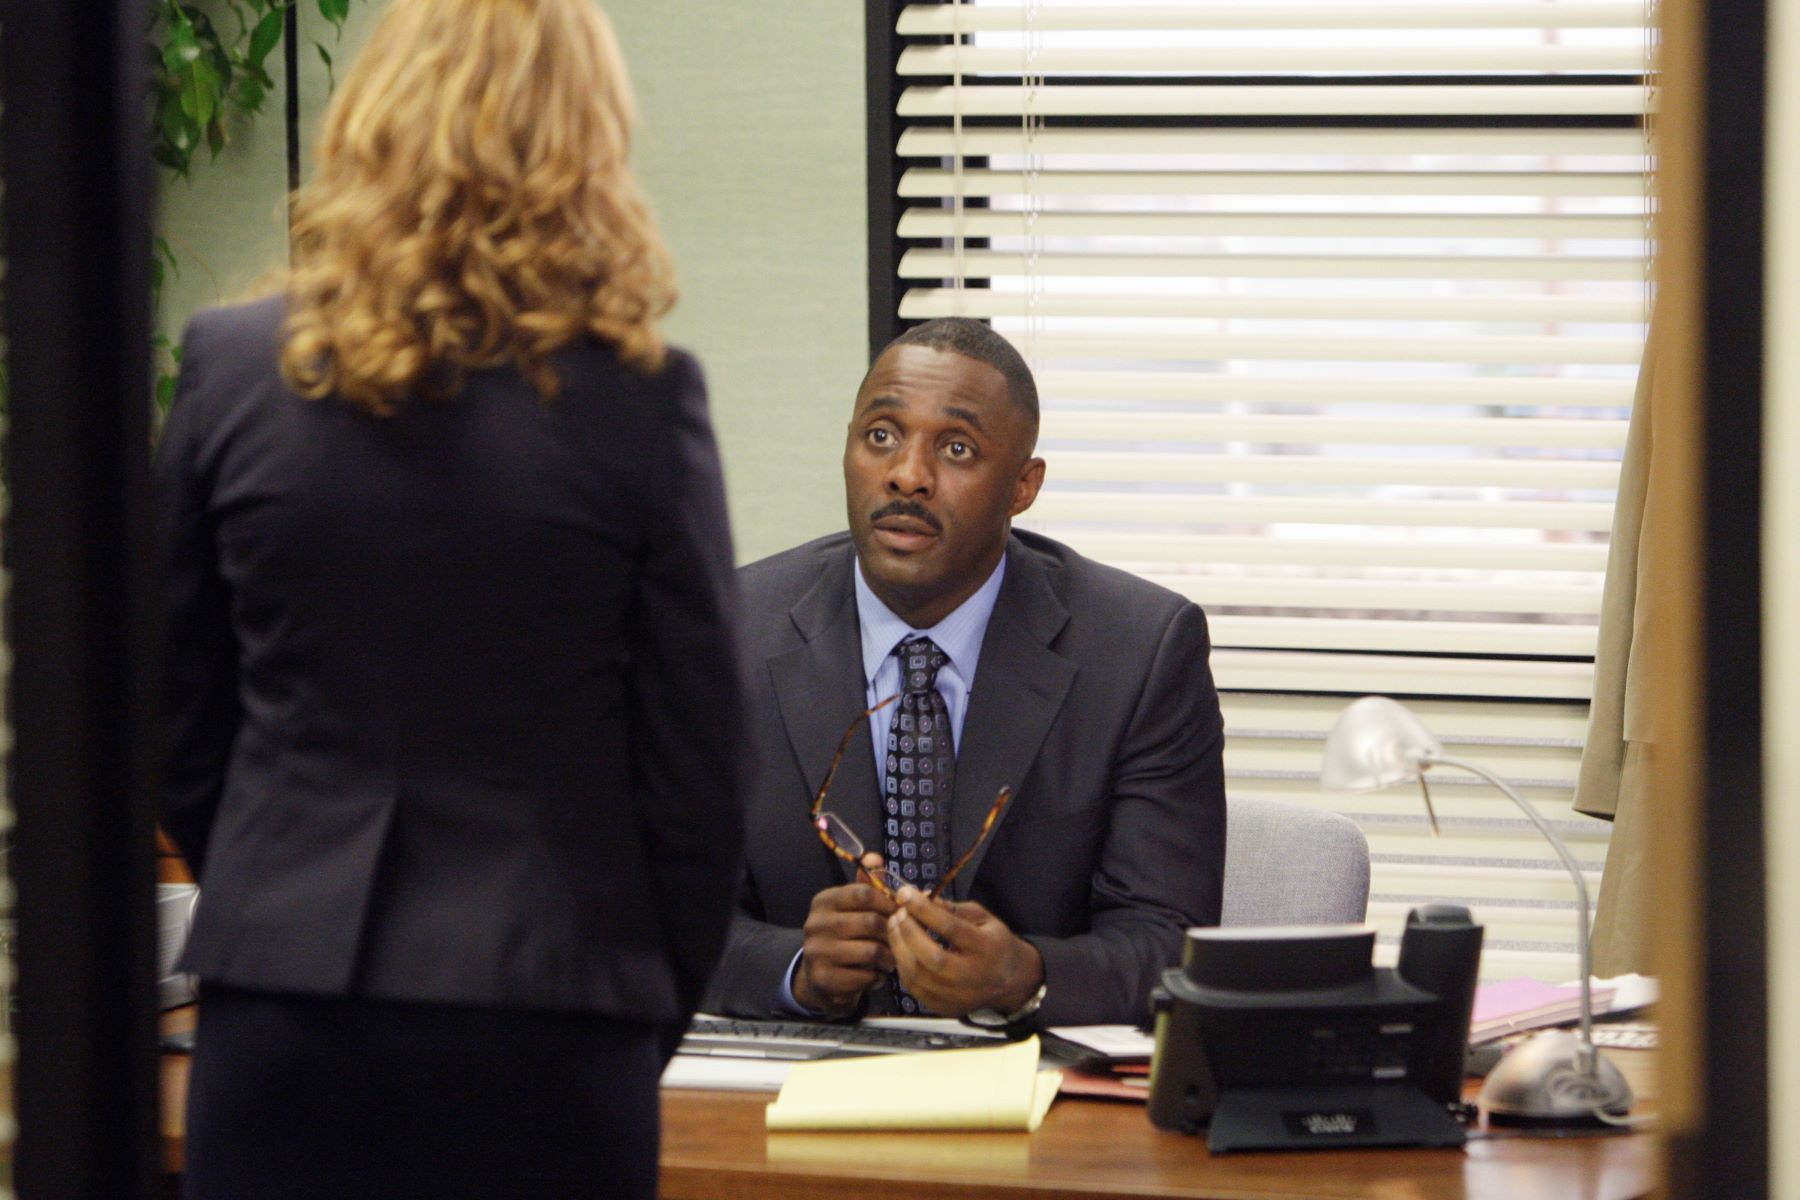 Jenna Fischer and Idris Elba in 'The Office'